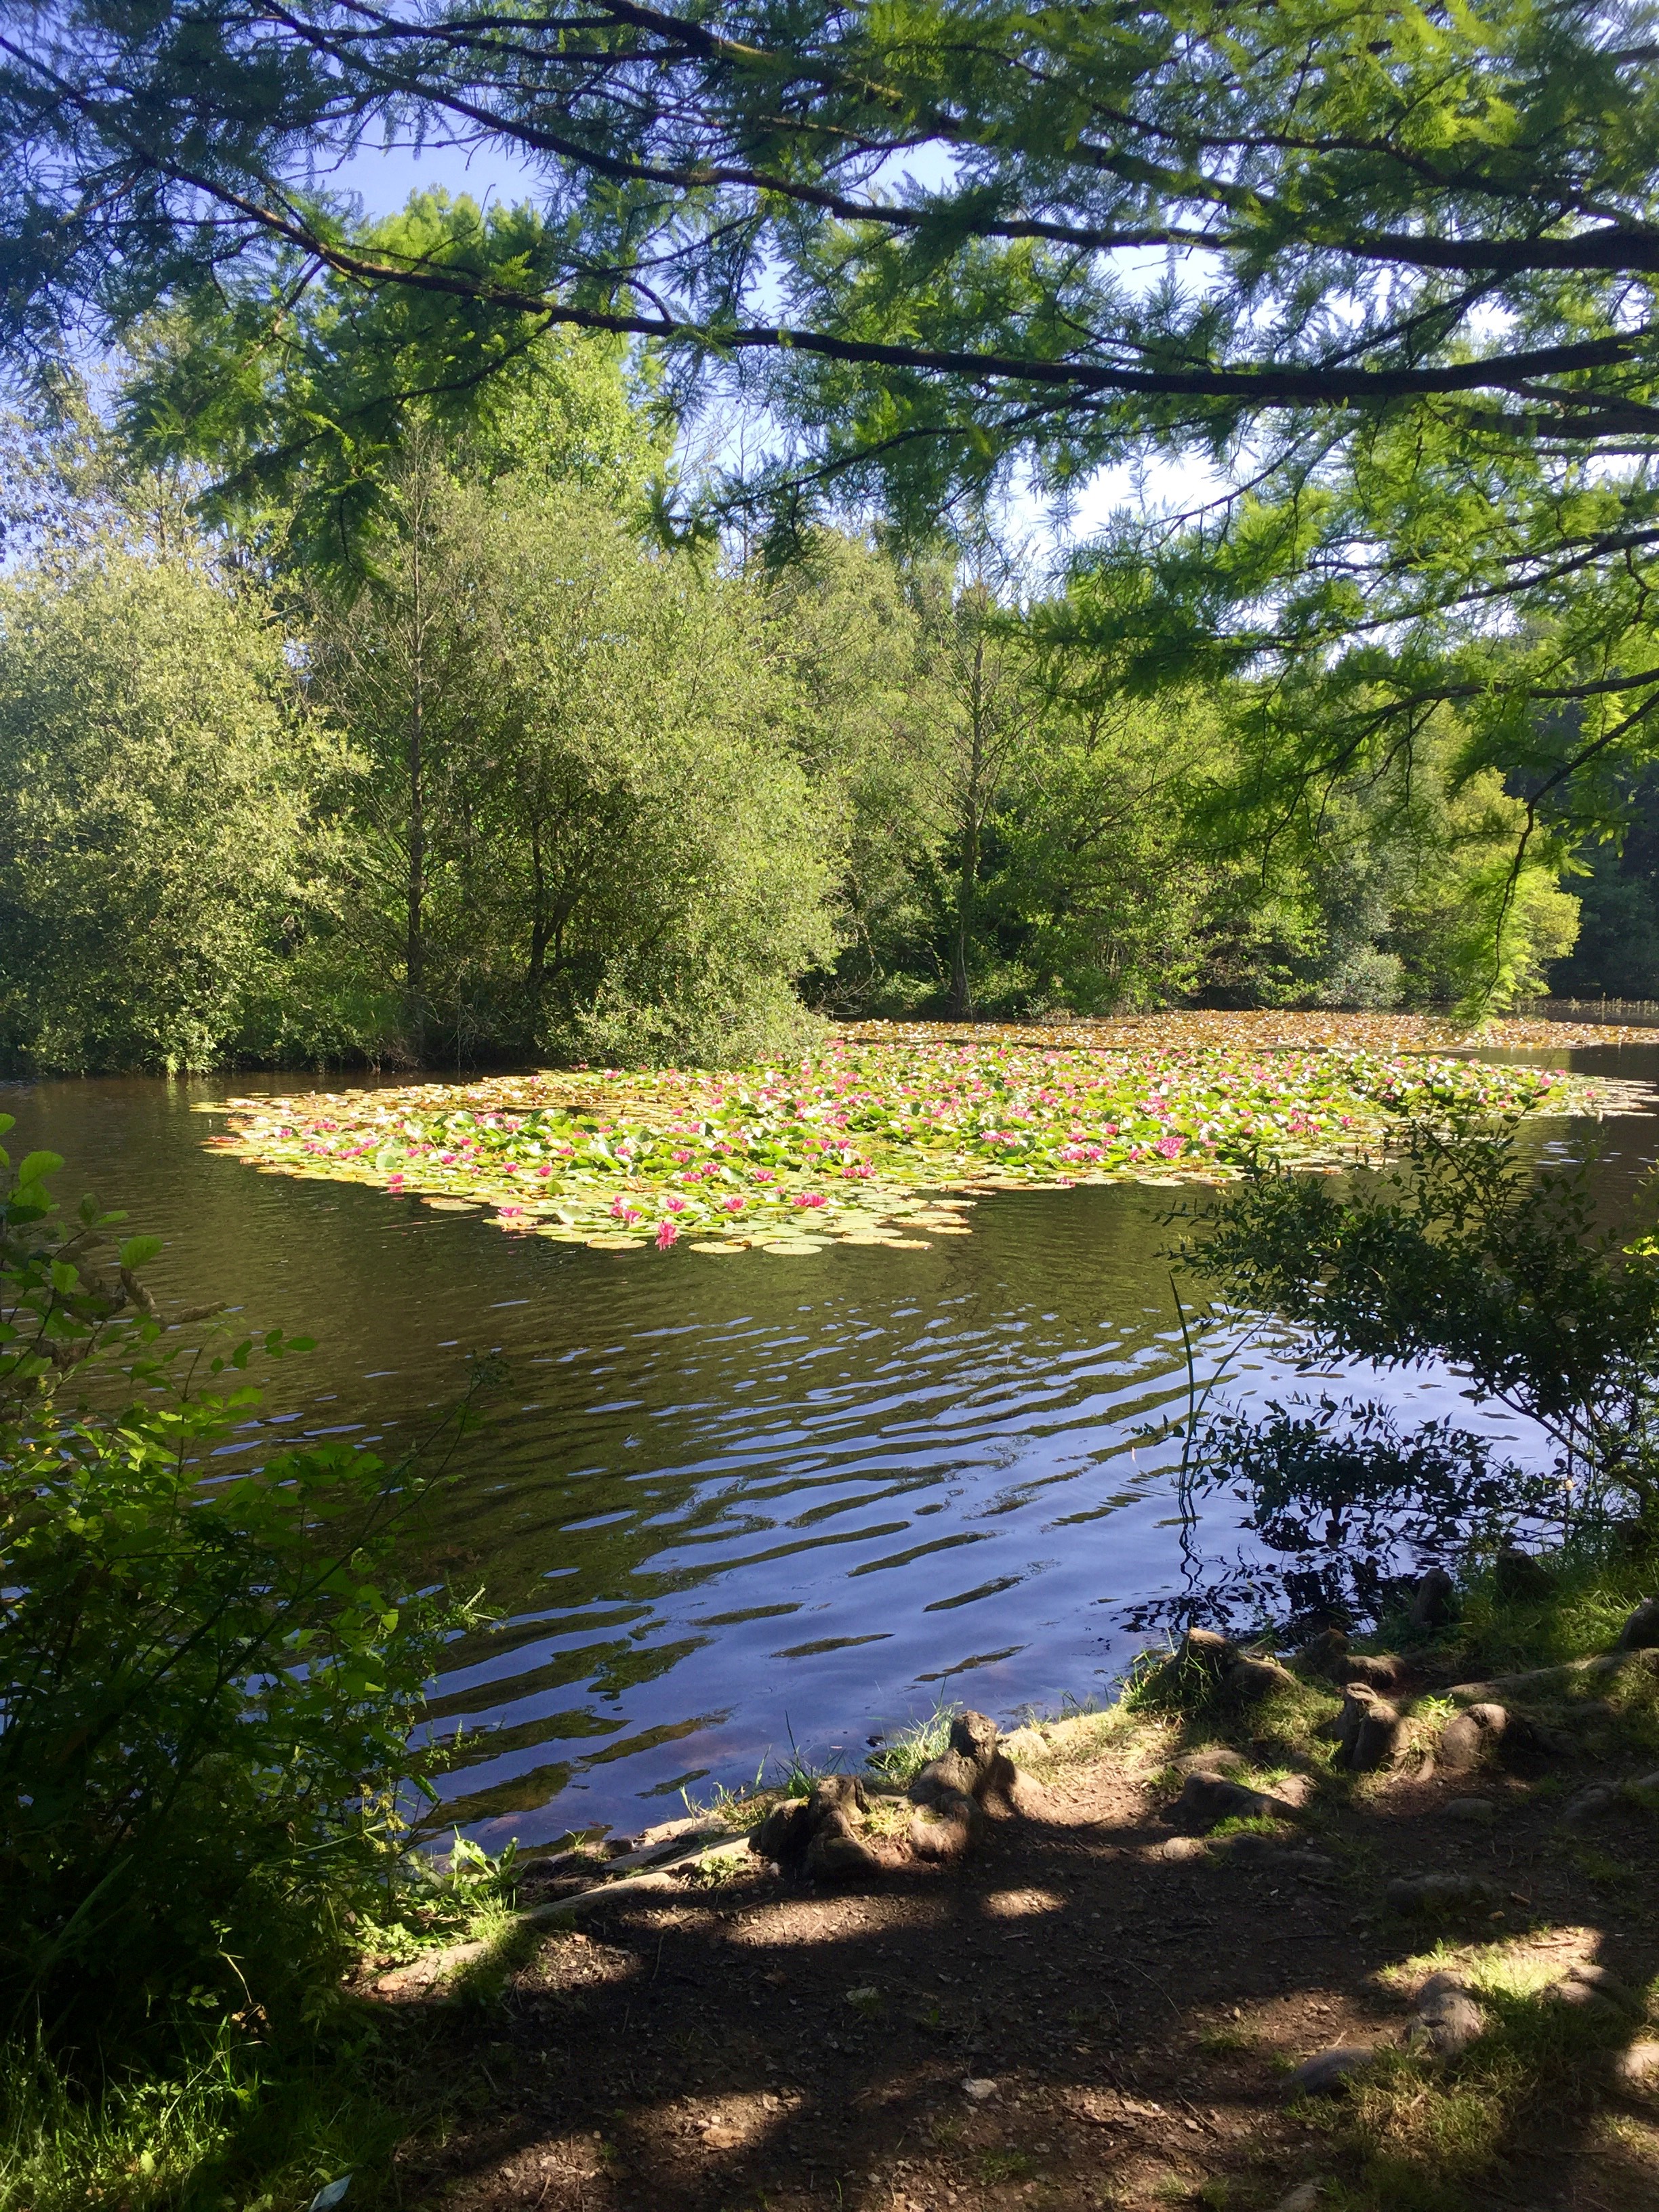 pond surrounded by trees with a large swath of blooming lily pads on top